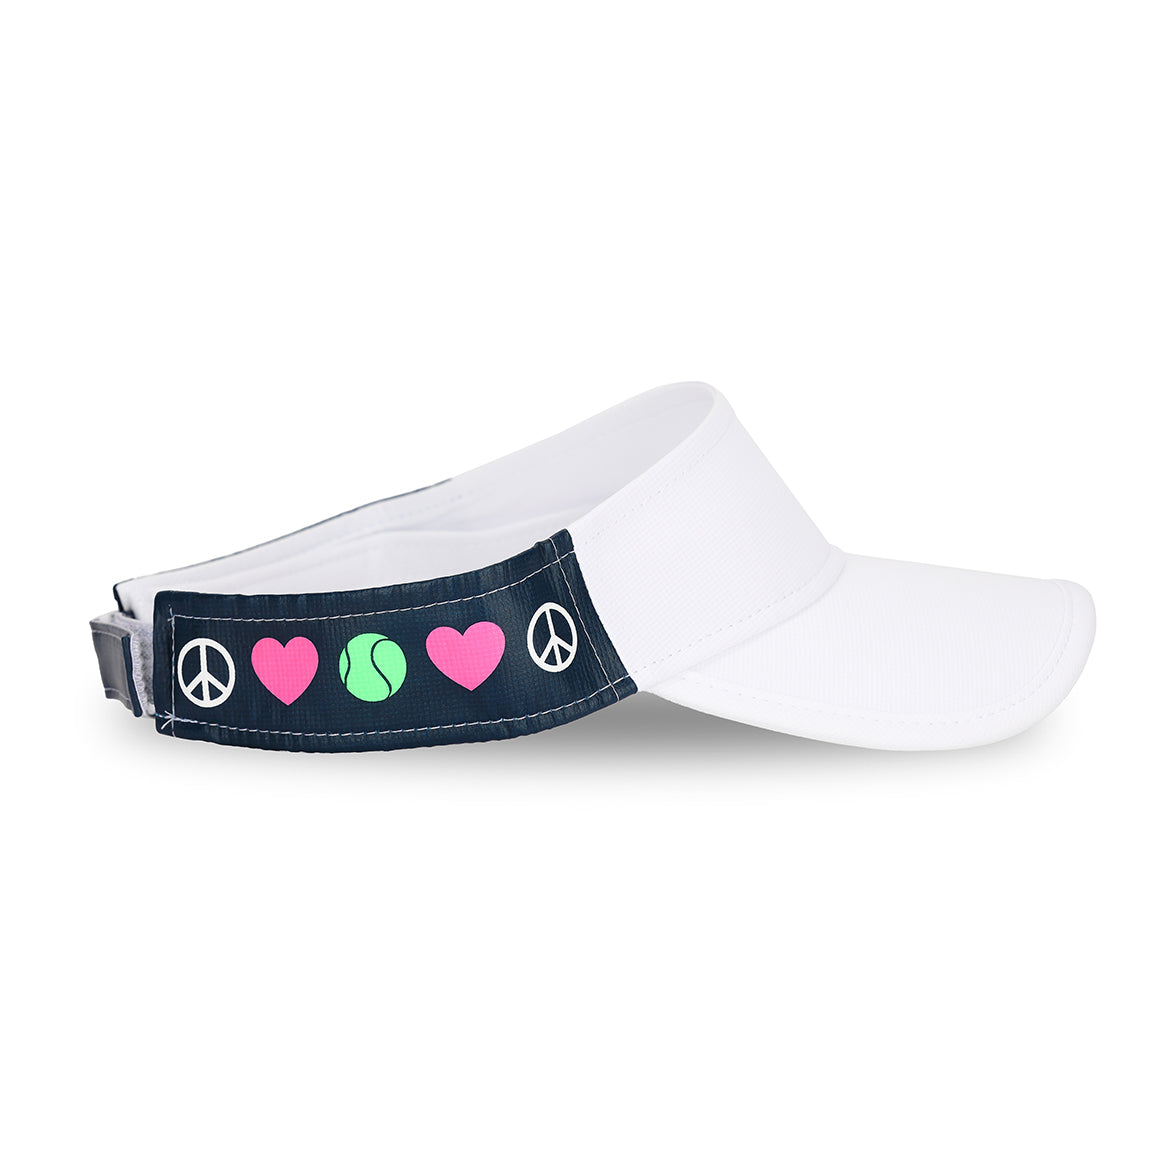 Side view of navy kids visor with white peace sign, pink heart and green tennis ball printed on sides